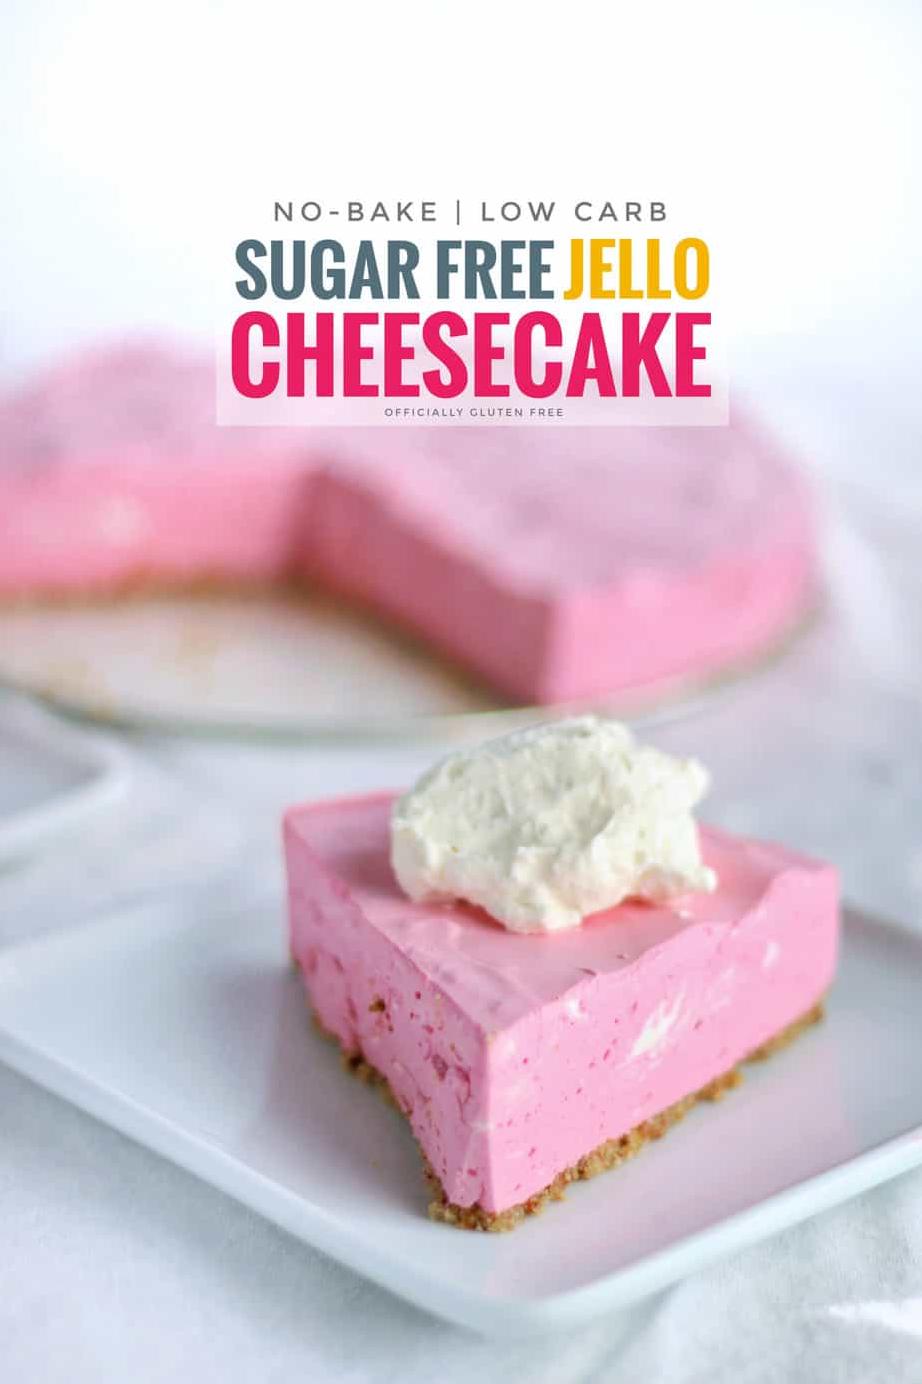  Who says jello is just for kids? This recipe is for everyone.